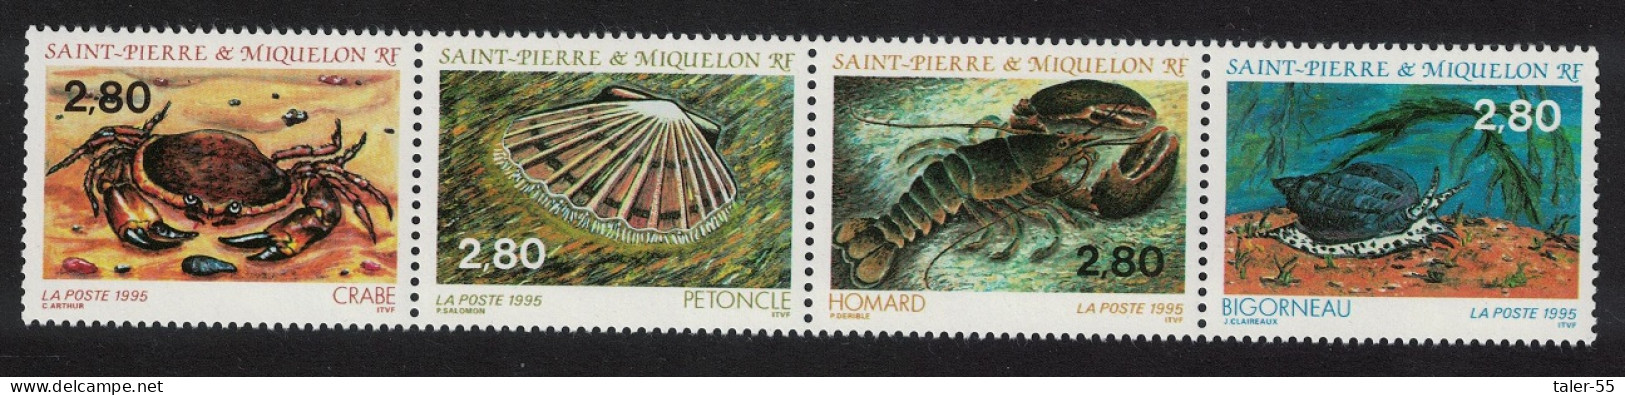 St. Pierre And Miquelon Crustaceans And Molluscs 4v Strip 1995 MNH SG#731-734 - Unused Stamps